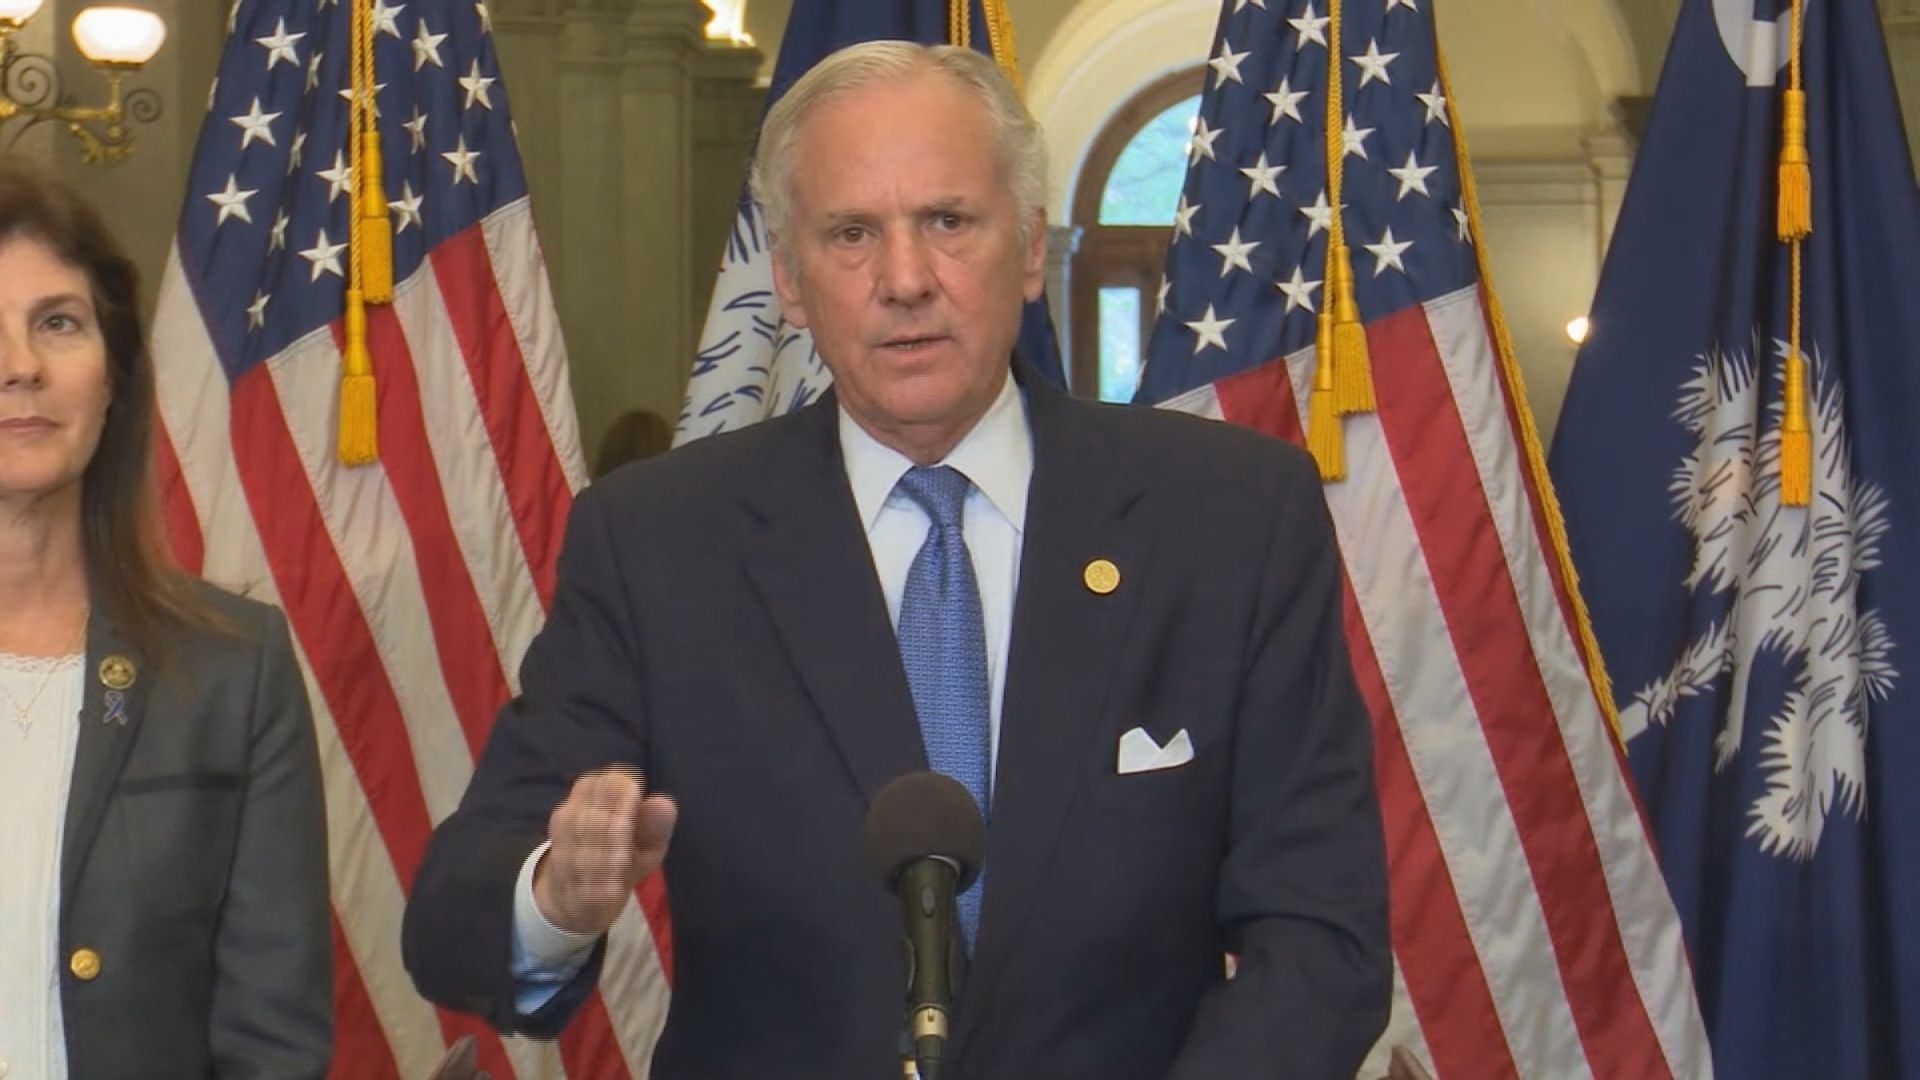 South Carolina Gov. Henry McMaster outlined his budget priorities for the 2019 legislative session, including a teacher pay raise.